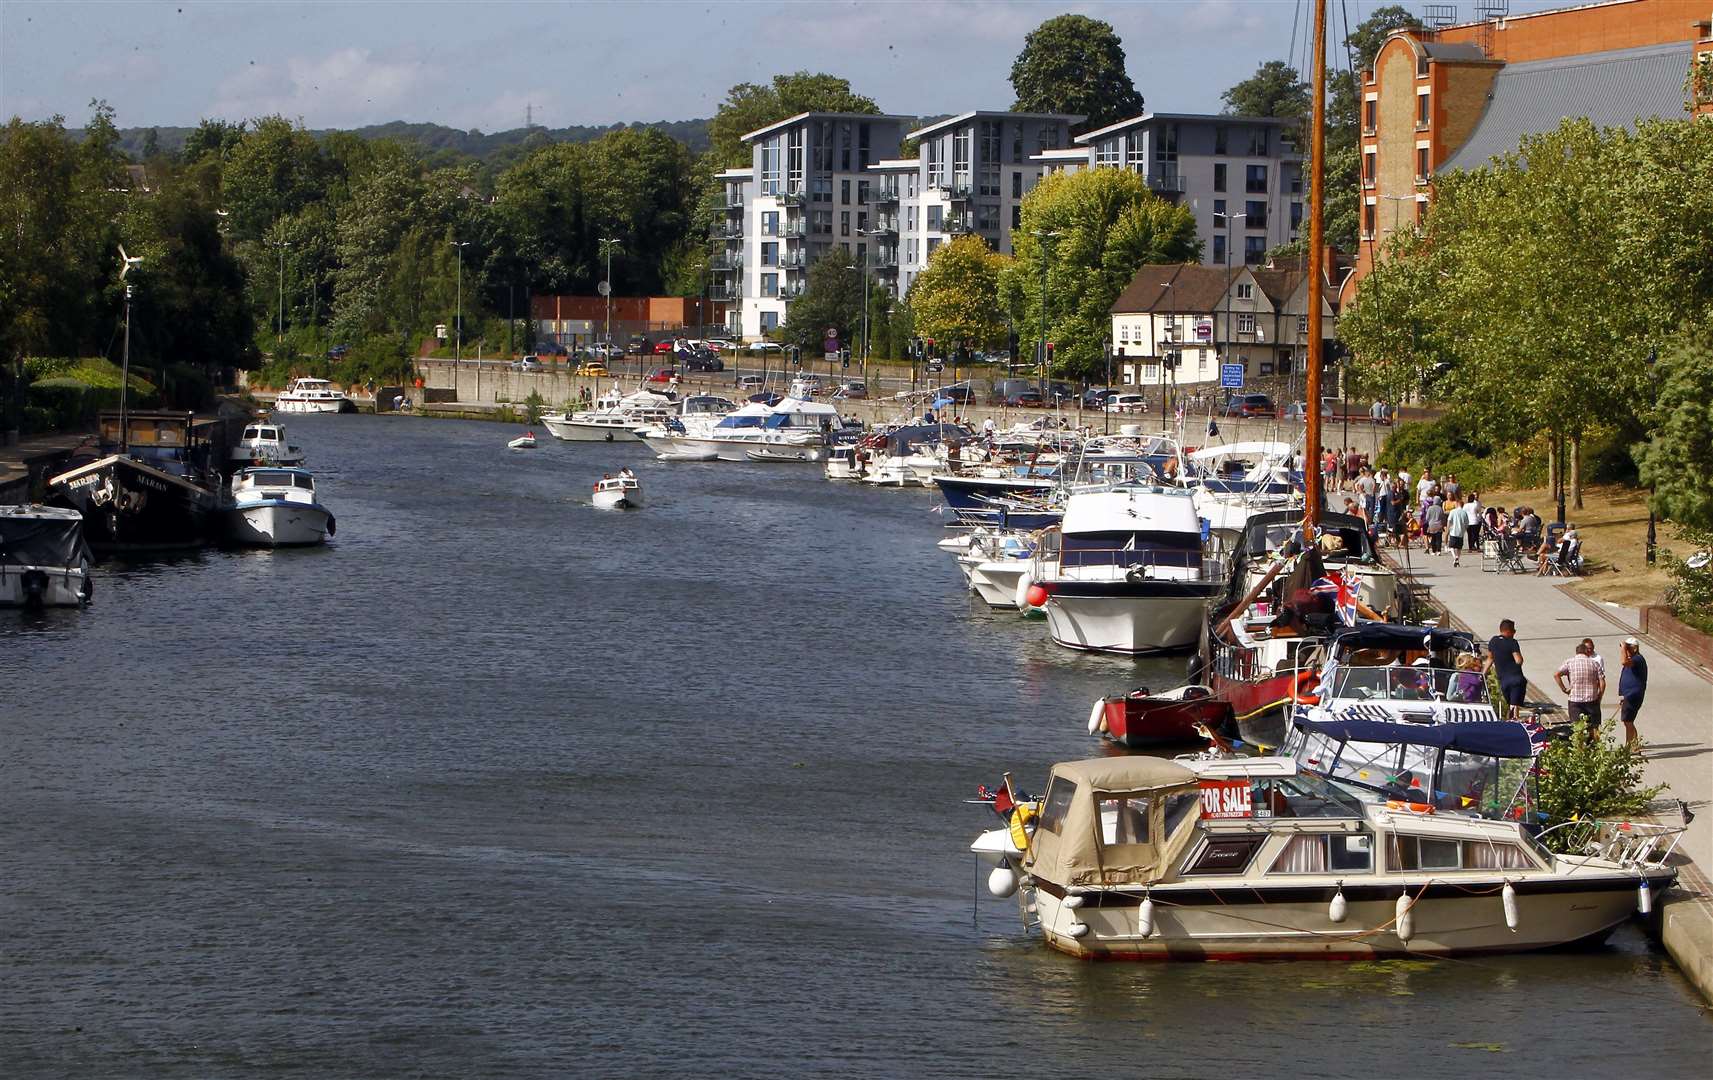 There will be patrols of the River Medway in Maidstone. Picture: Sean Aidan